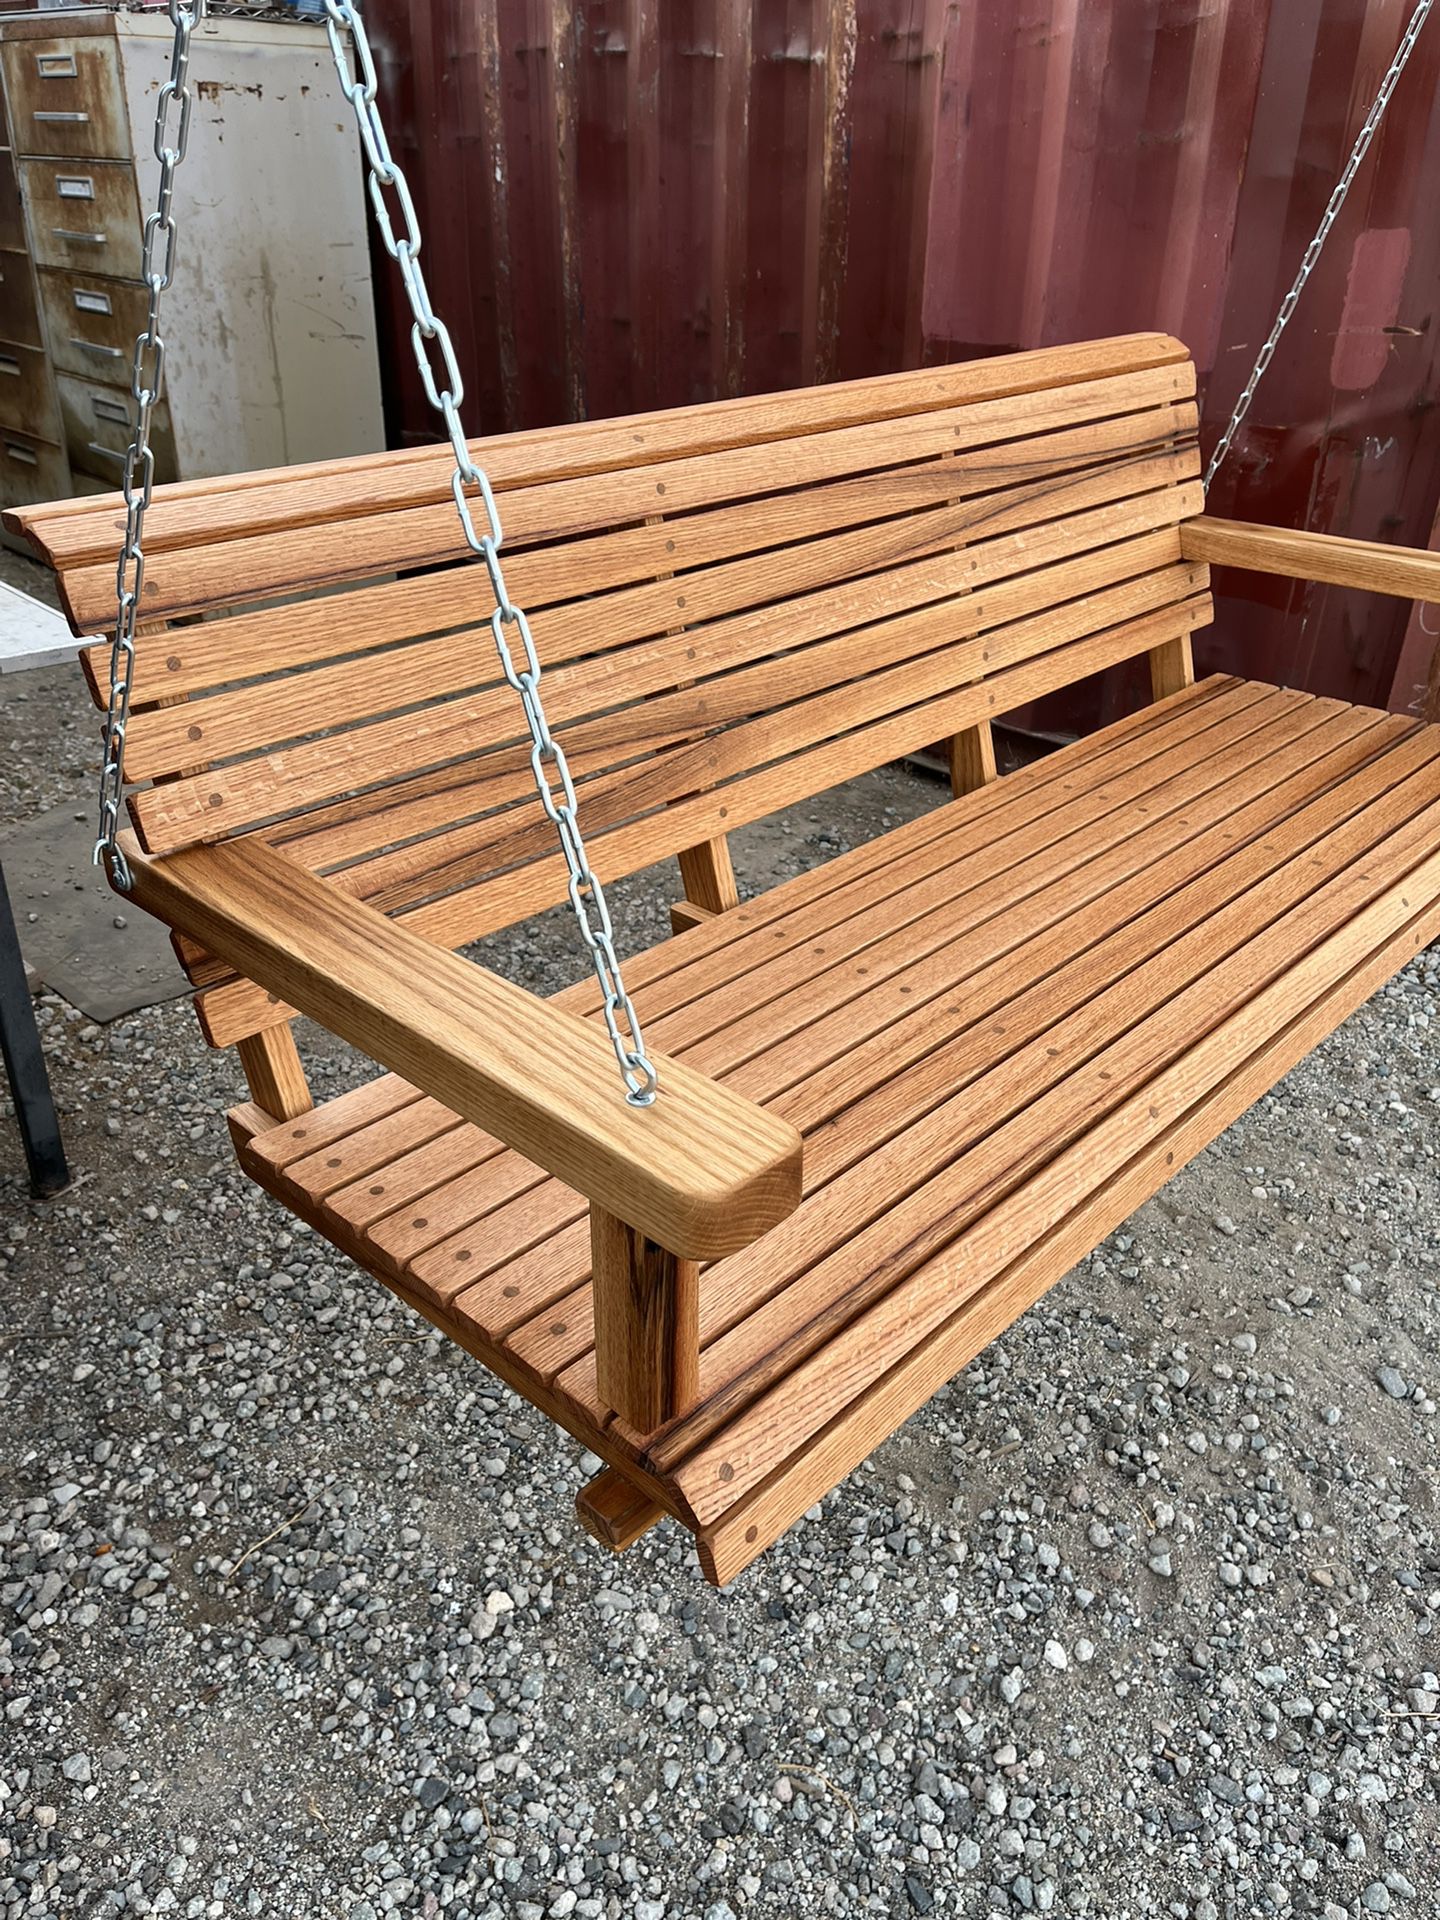 RUSTIC RED OAK PORCH SWINGS 60” Wide, Oil Finish, With Chain   $400